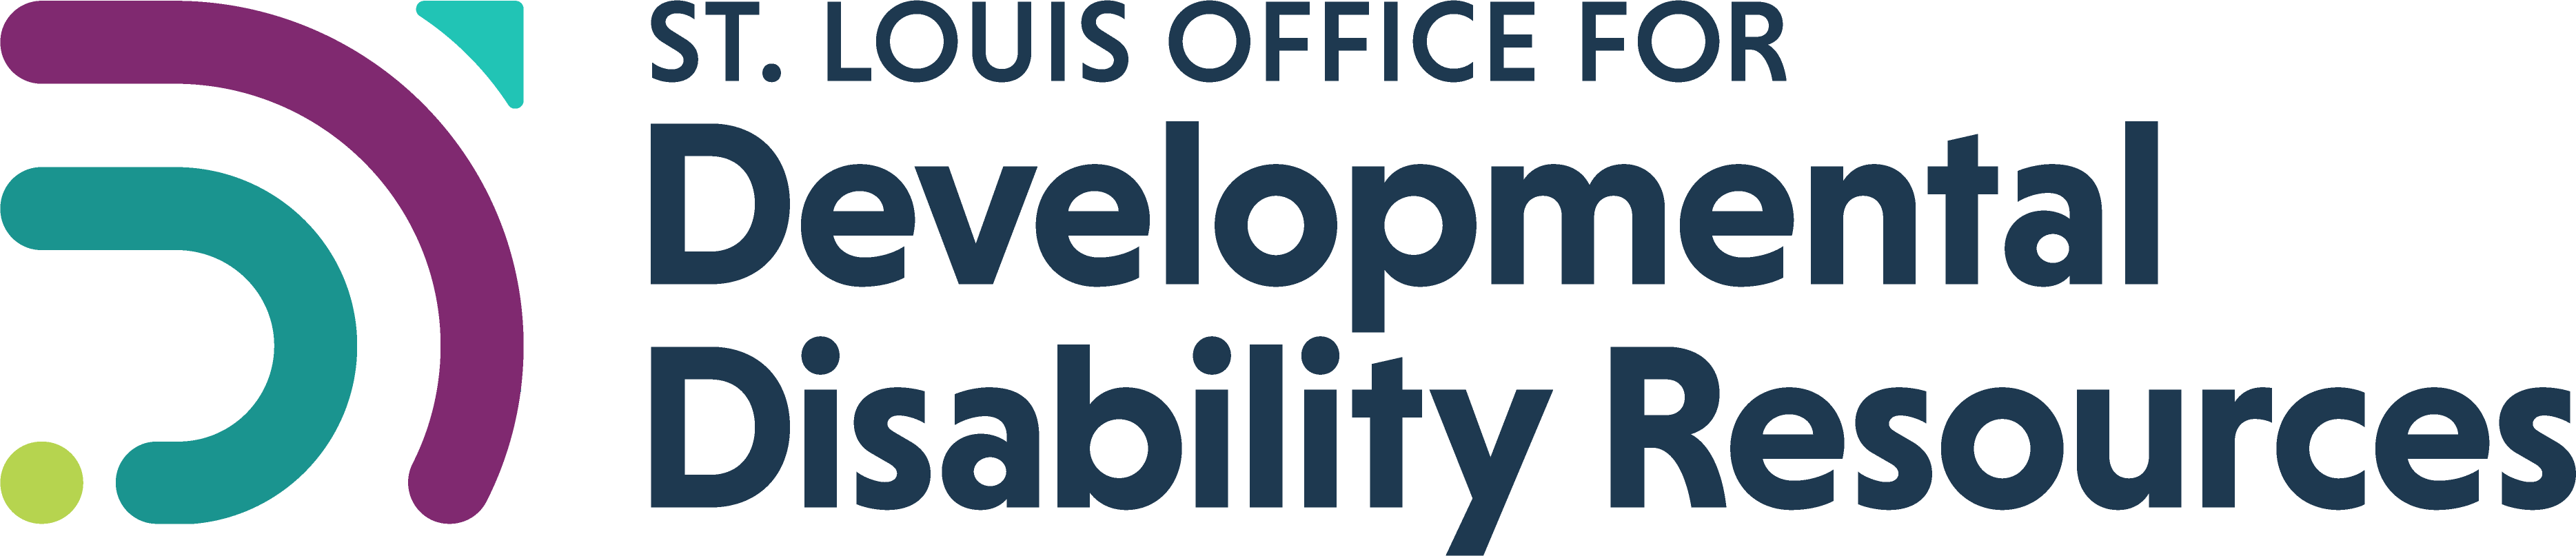 St. Louis Office for Developmental Disability Resources logo